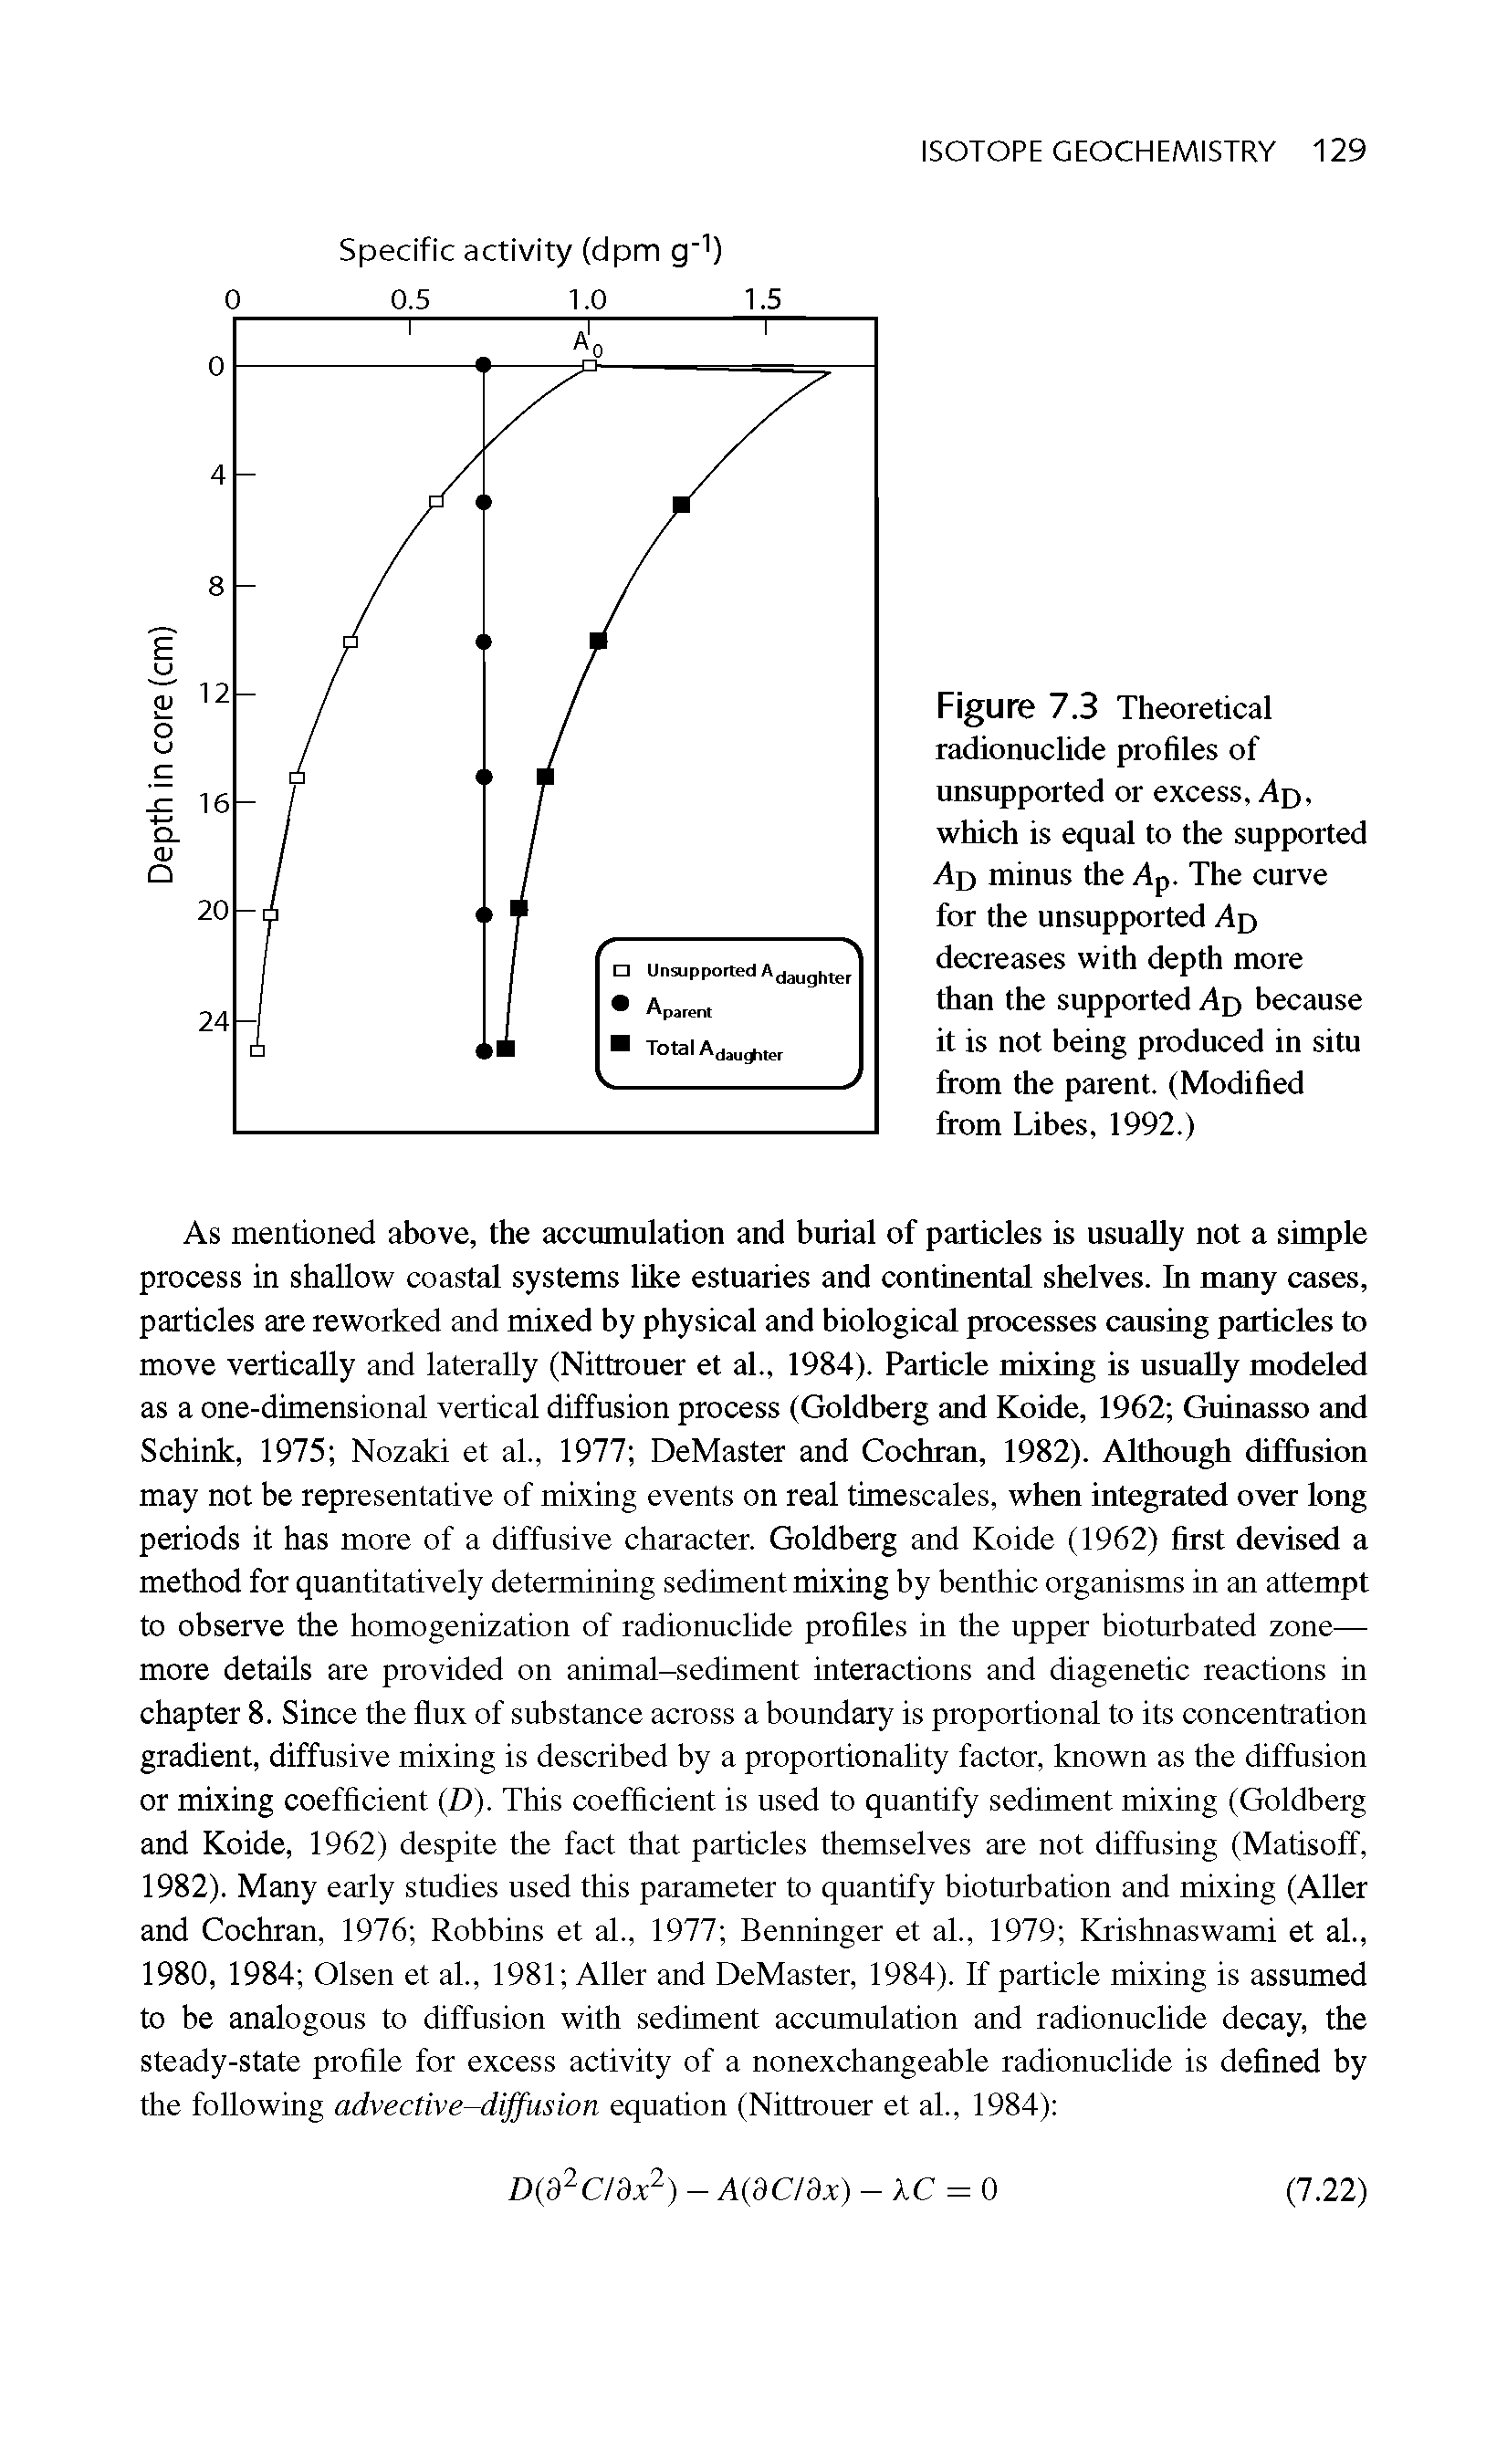 Figure 7.3 Theoretical radionuclide profiles of unsupported or excess, Ad, which is equal to the supported A ) minus the Ap. The curve for the unsupported Ap decreases with depth more than the supported Ap because it is not being produced in situ from the parent. (Modified from Libes, 1992.)...